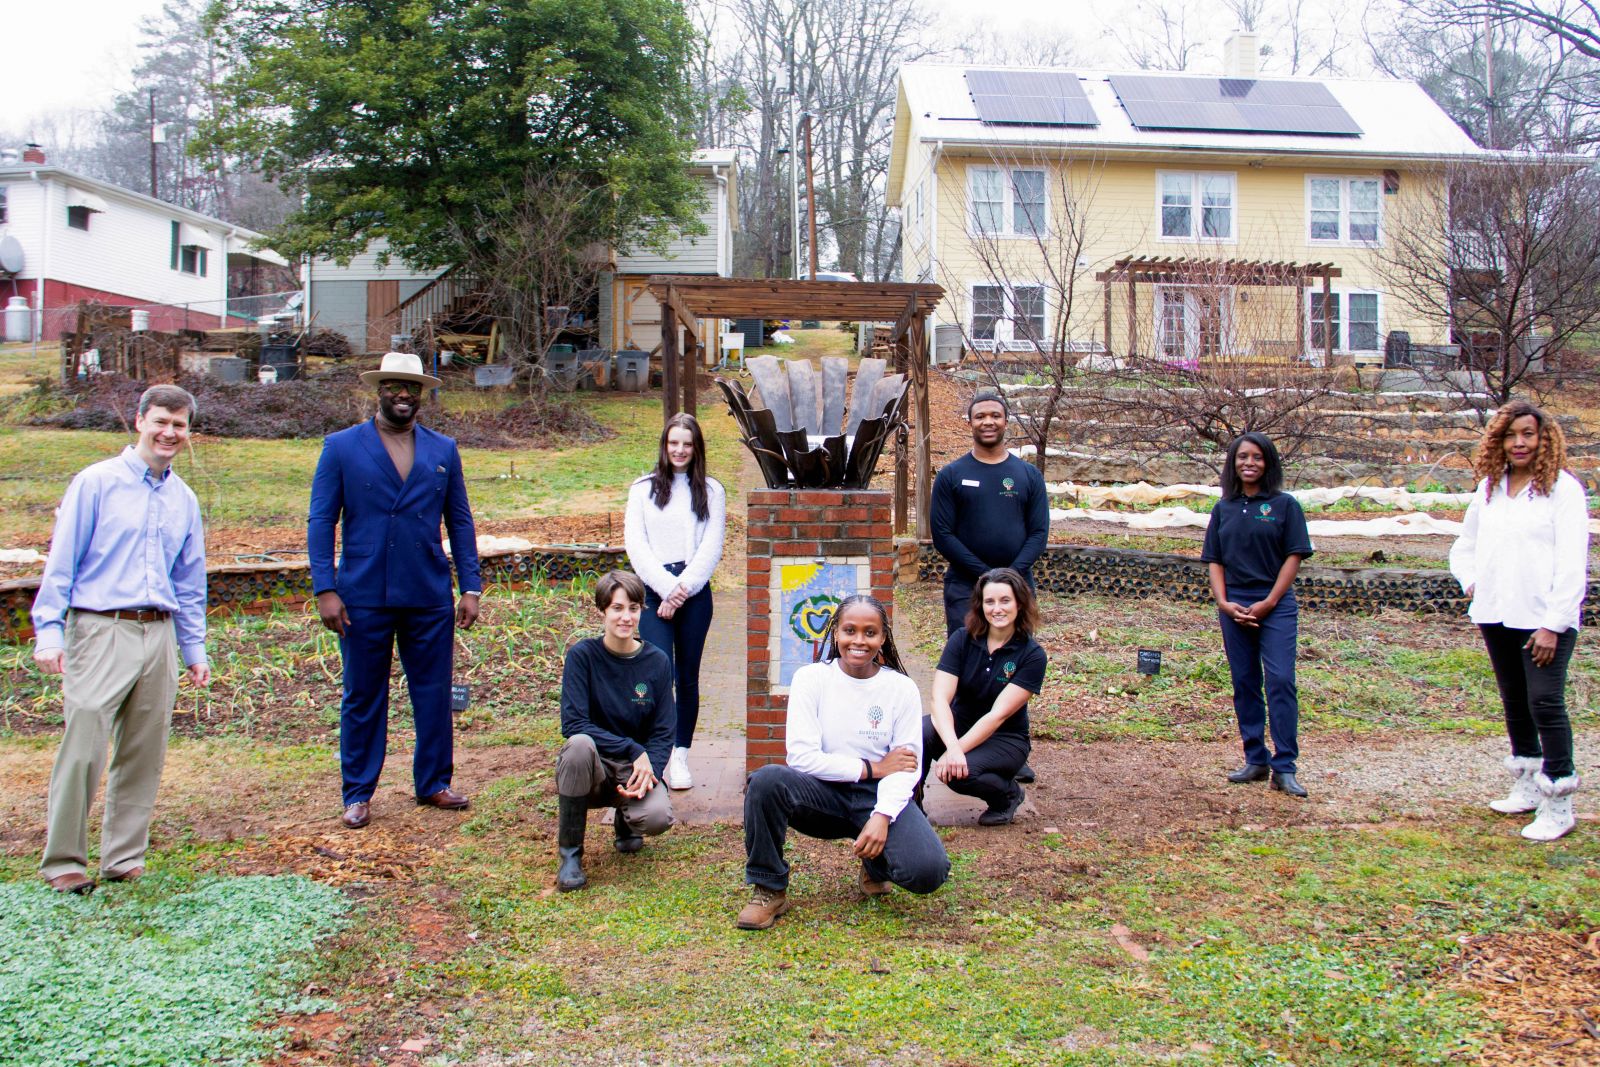 Annie's House in Nicholtown features a backyard garden, chicken coop, a root cellar and renewable energy and green transportation demonstrations, among other agricultural education opportunities. (Photo/Provided)